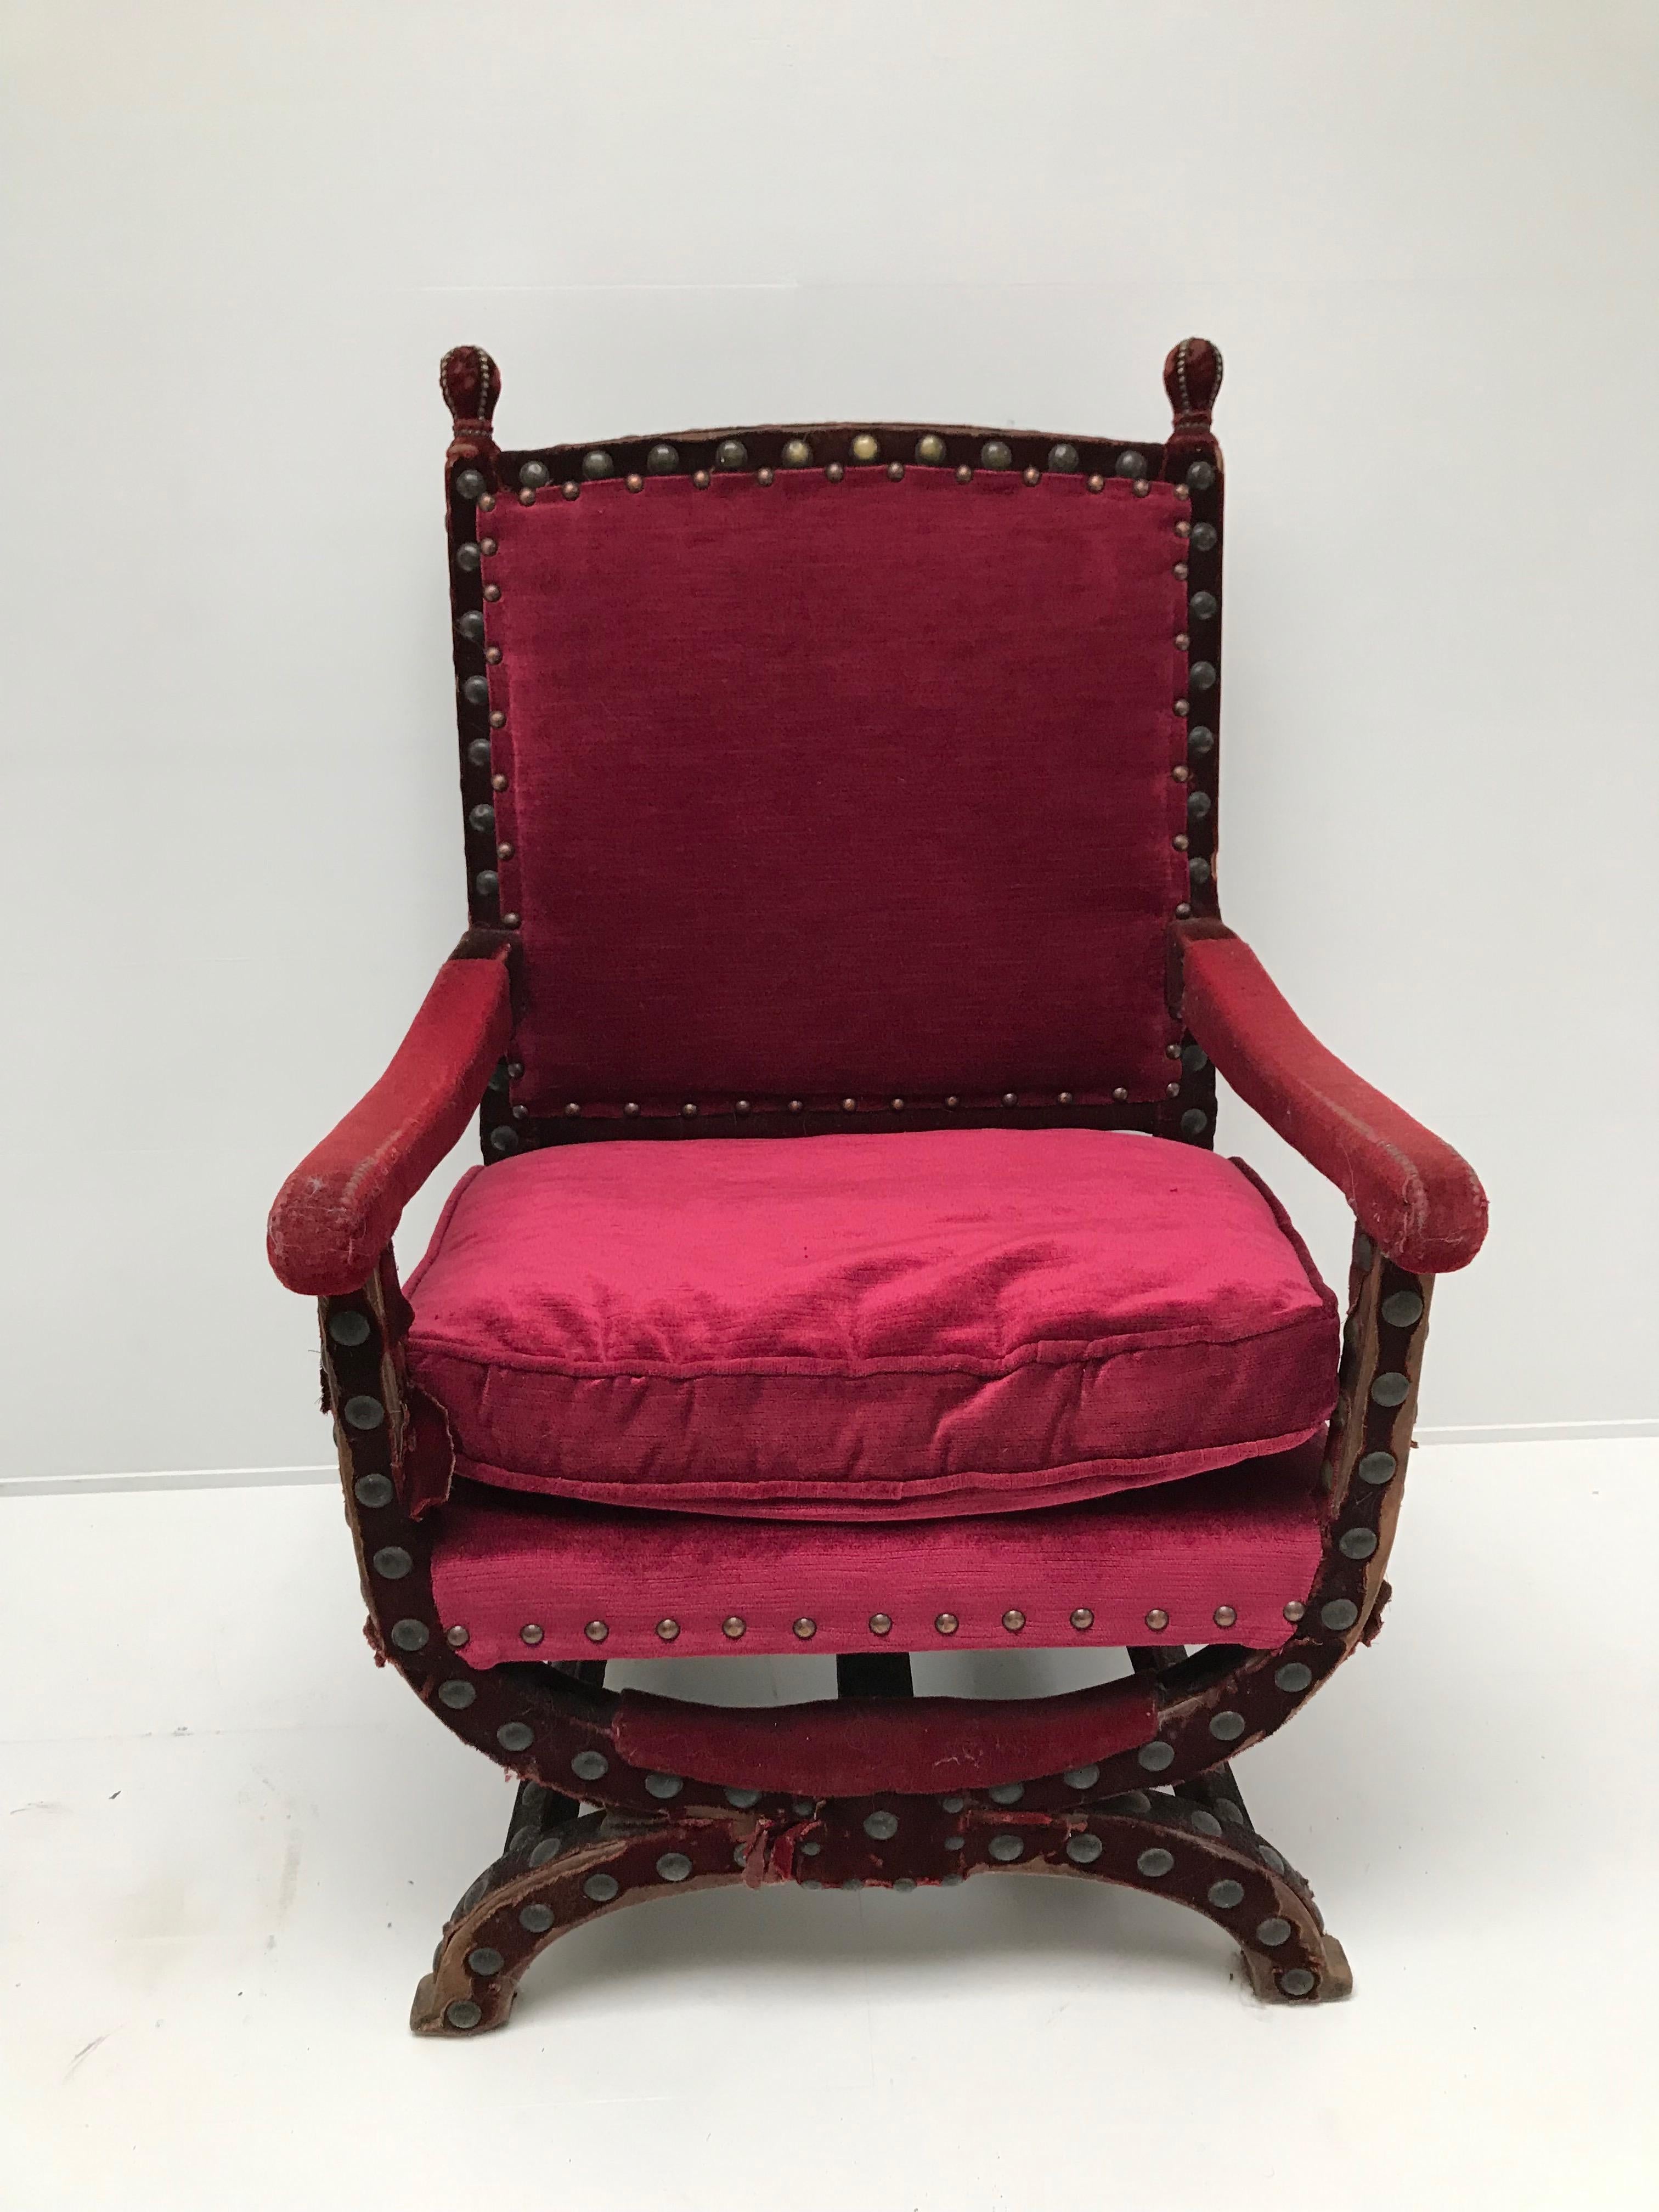 Exceptional English country chair, red velvet with cushion.